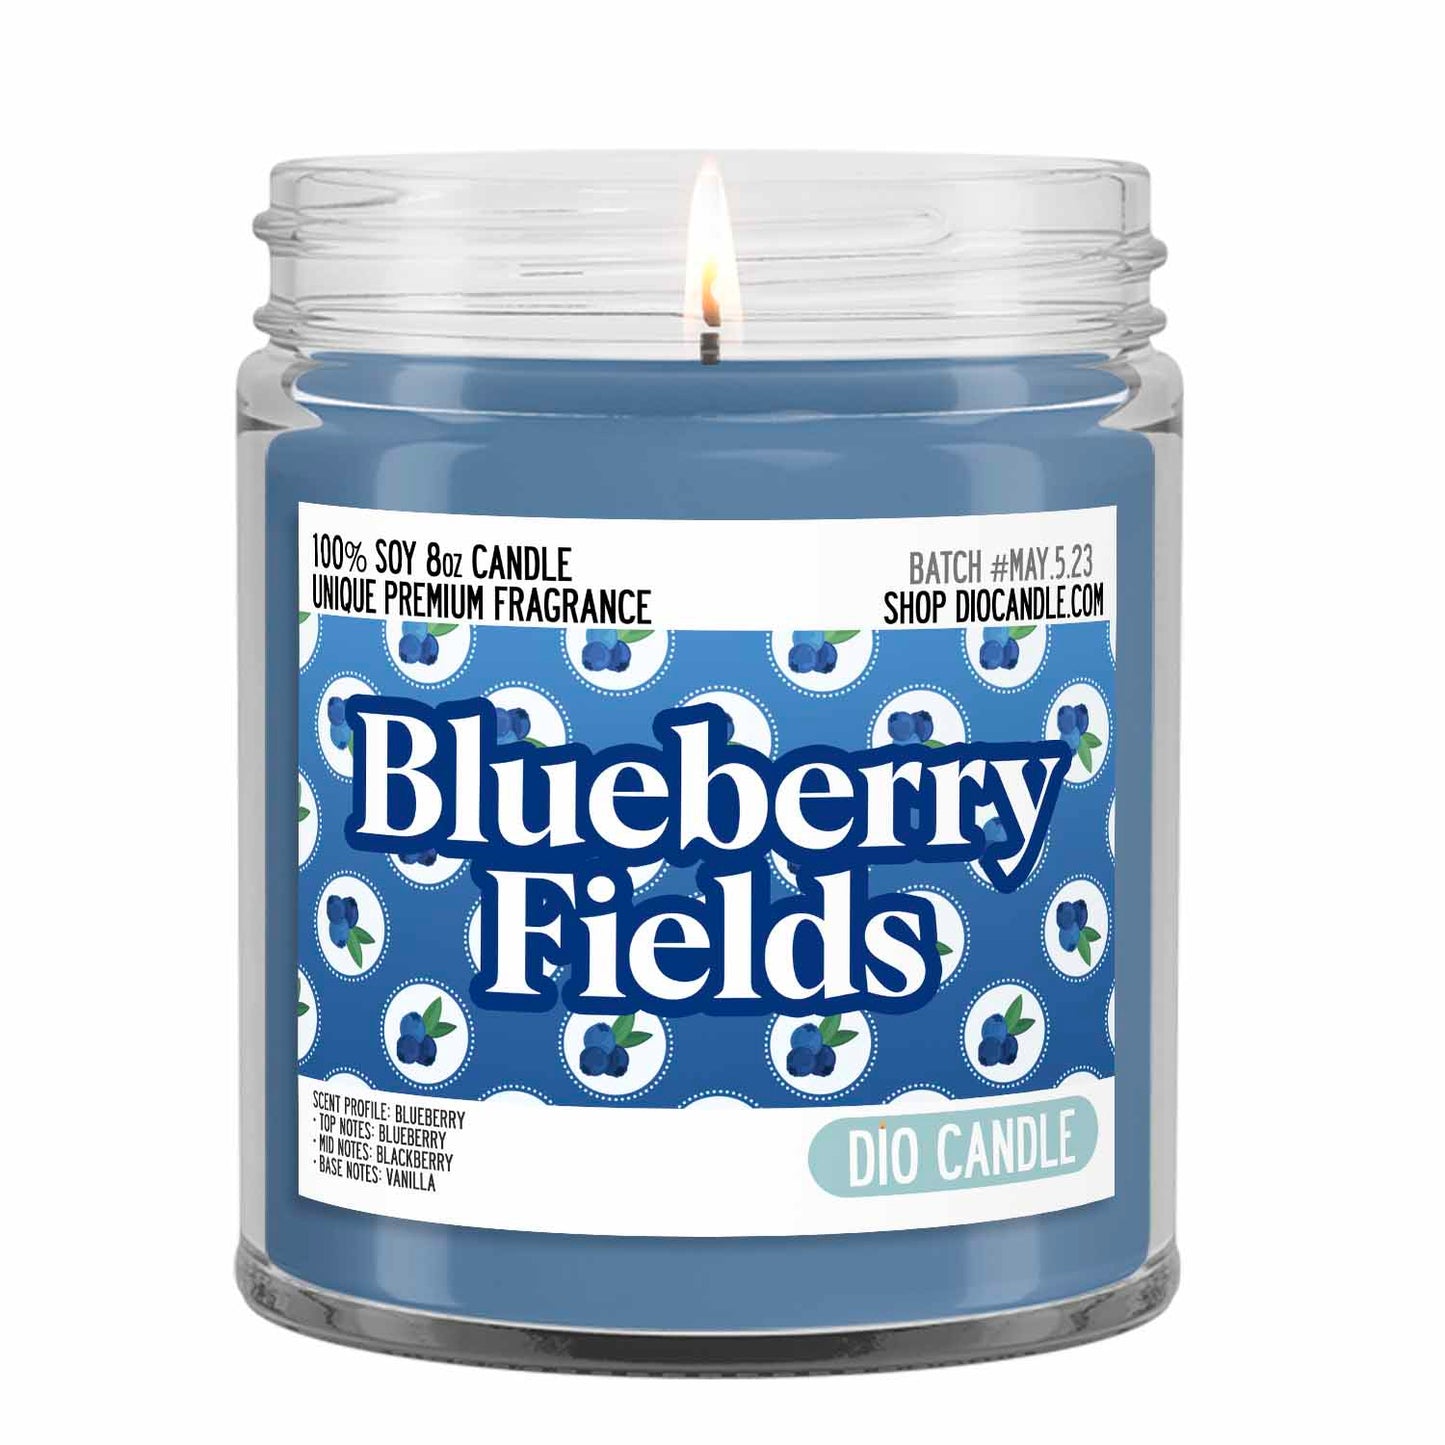 Blueberry Fields Candle